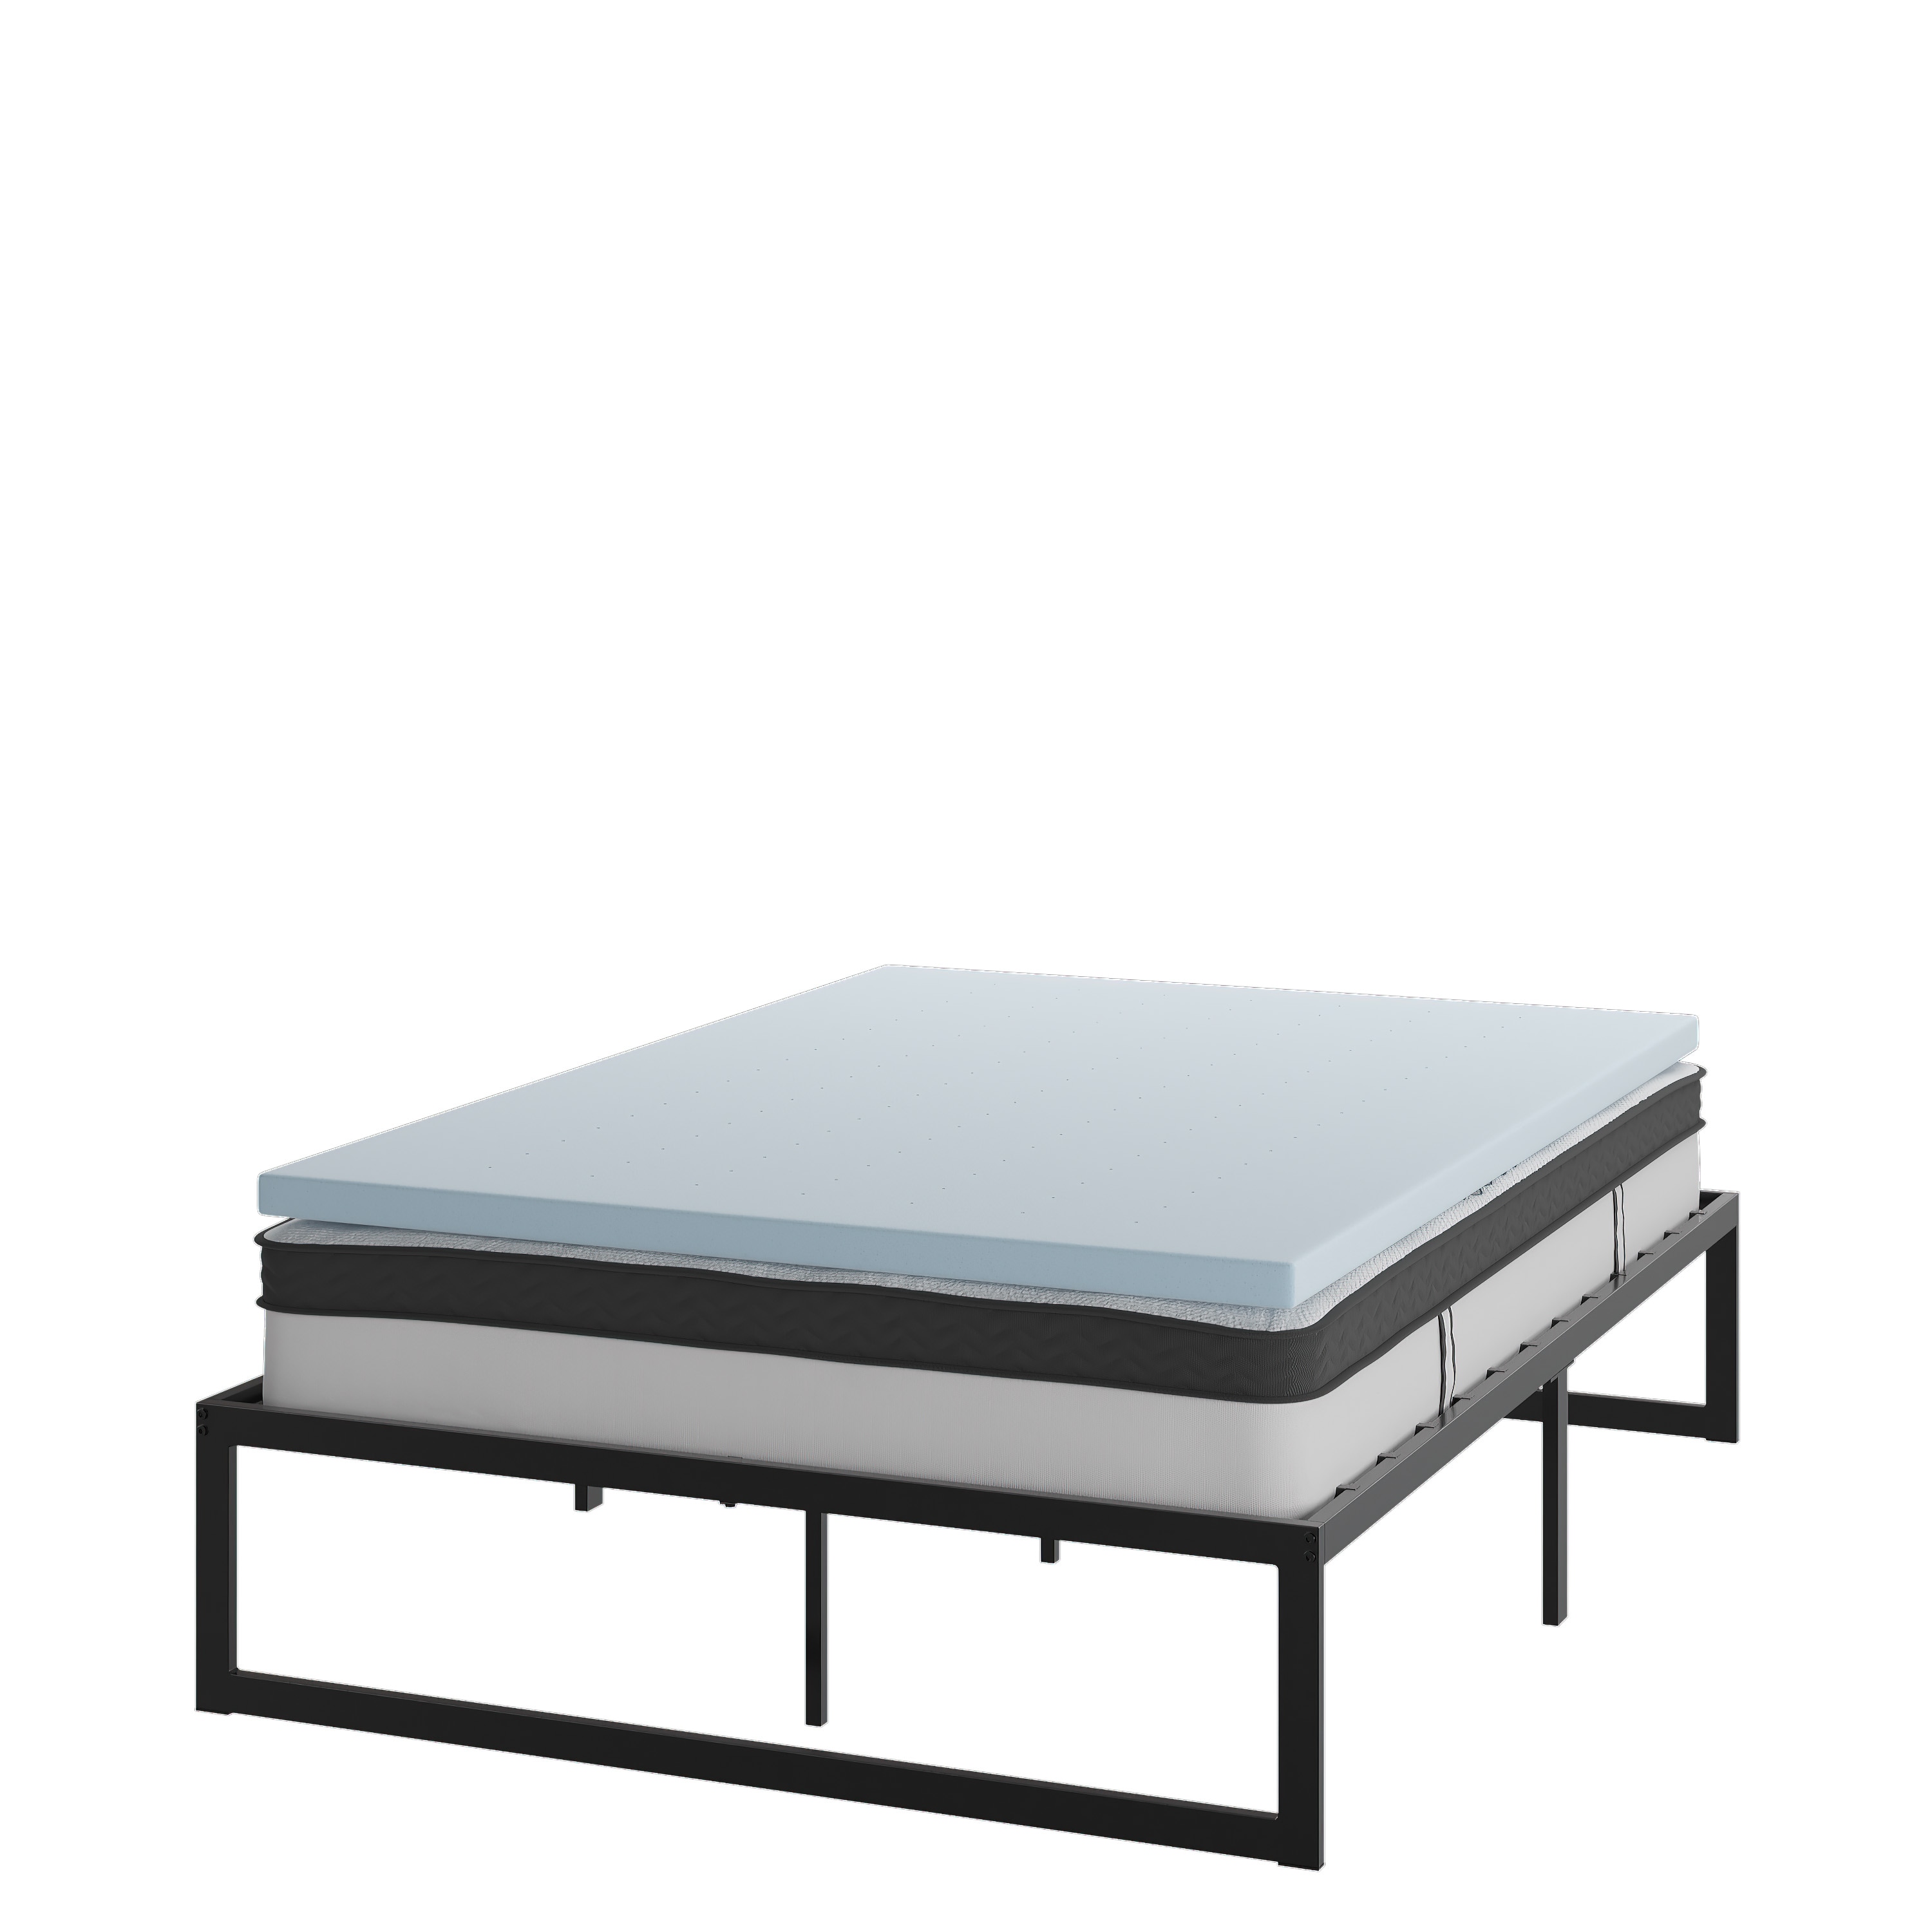 Flash Furniture 14 Inch Metal Platform Bed Frame with 10 Inch Pocket Spring Mattress and 2 Inch Cool Gel Memory Foam Topper - Full Full Contemporary -  XU-BD10-10PSM2M35-F-GG